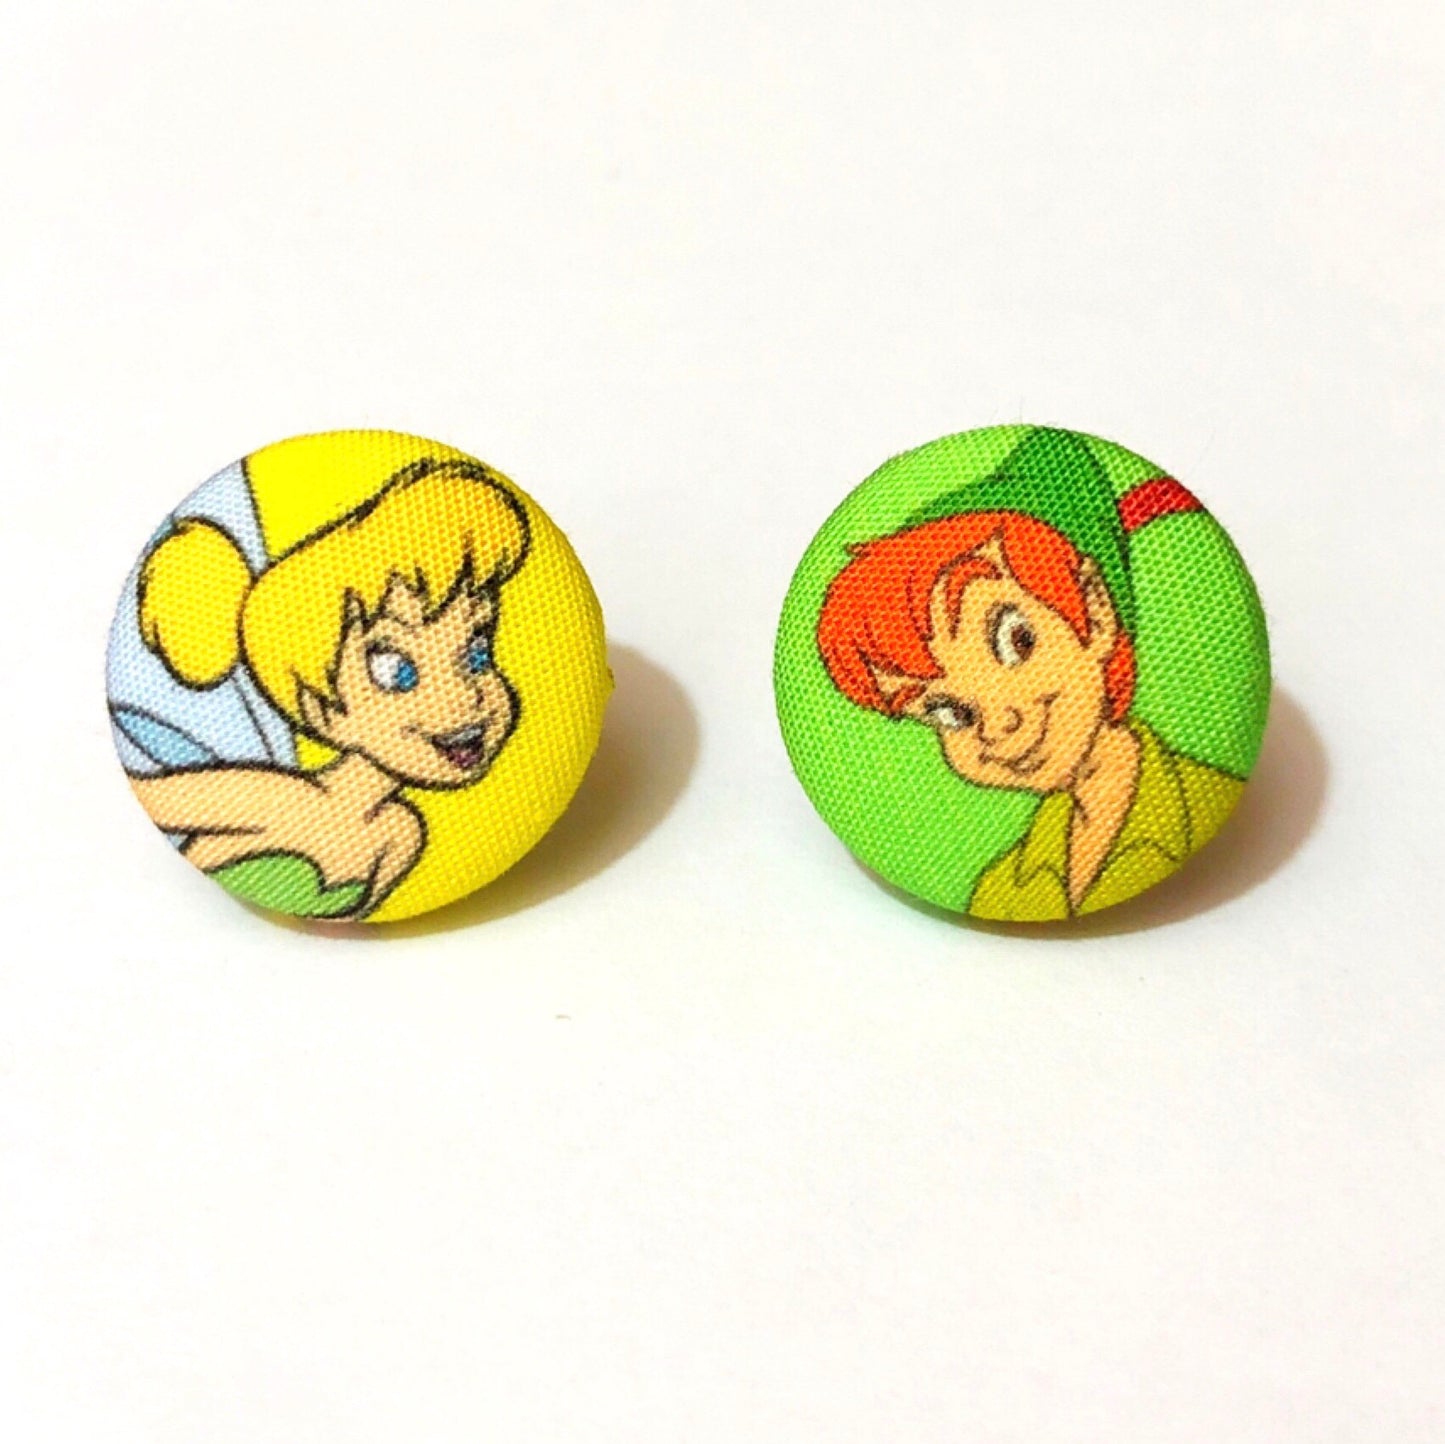 Peter & Tink Fabric Button Earrings